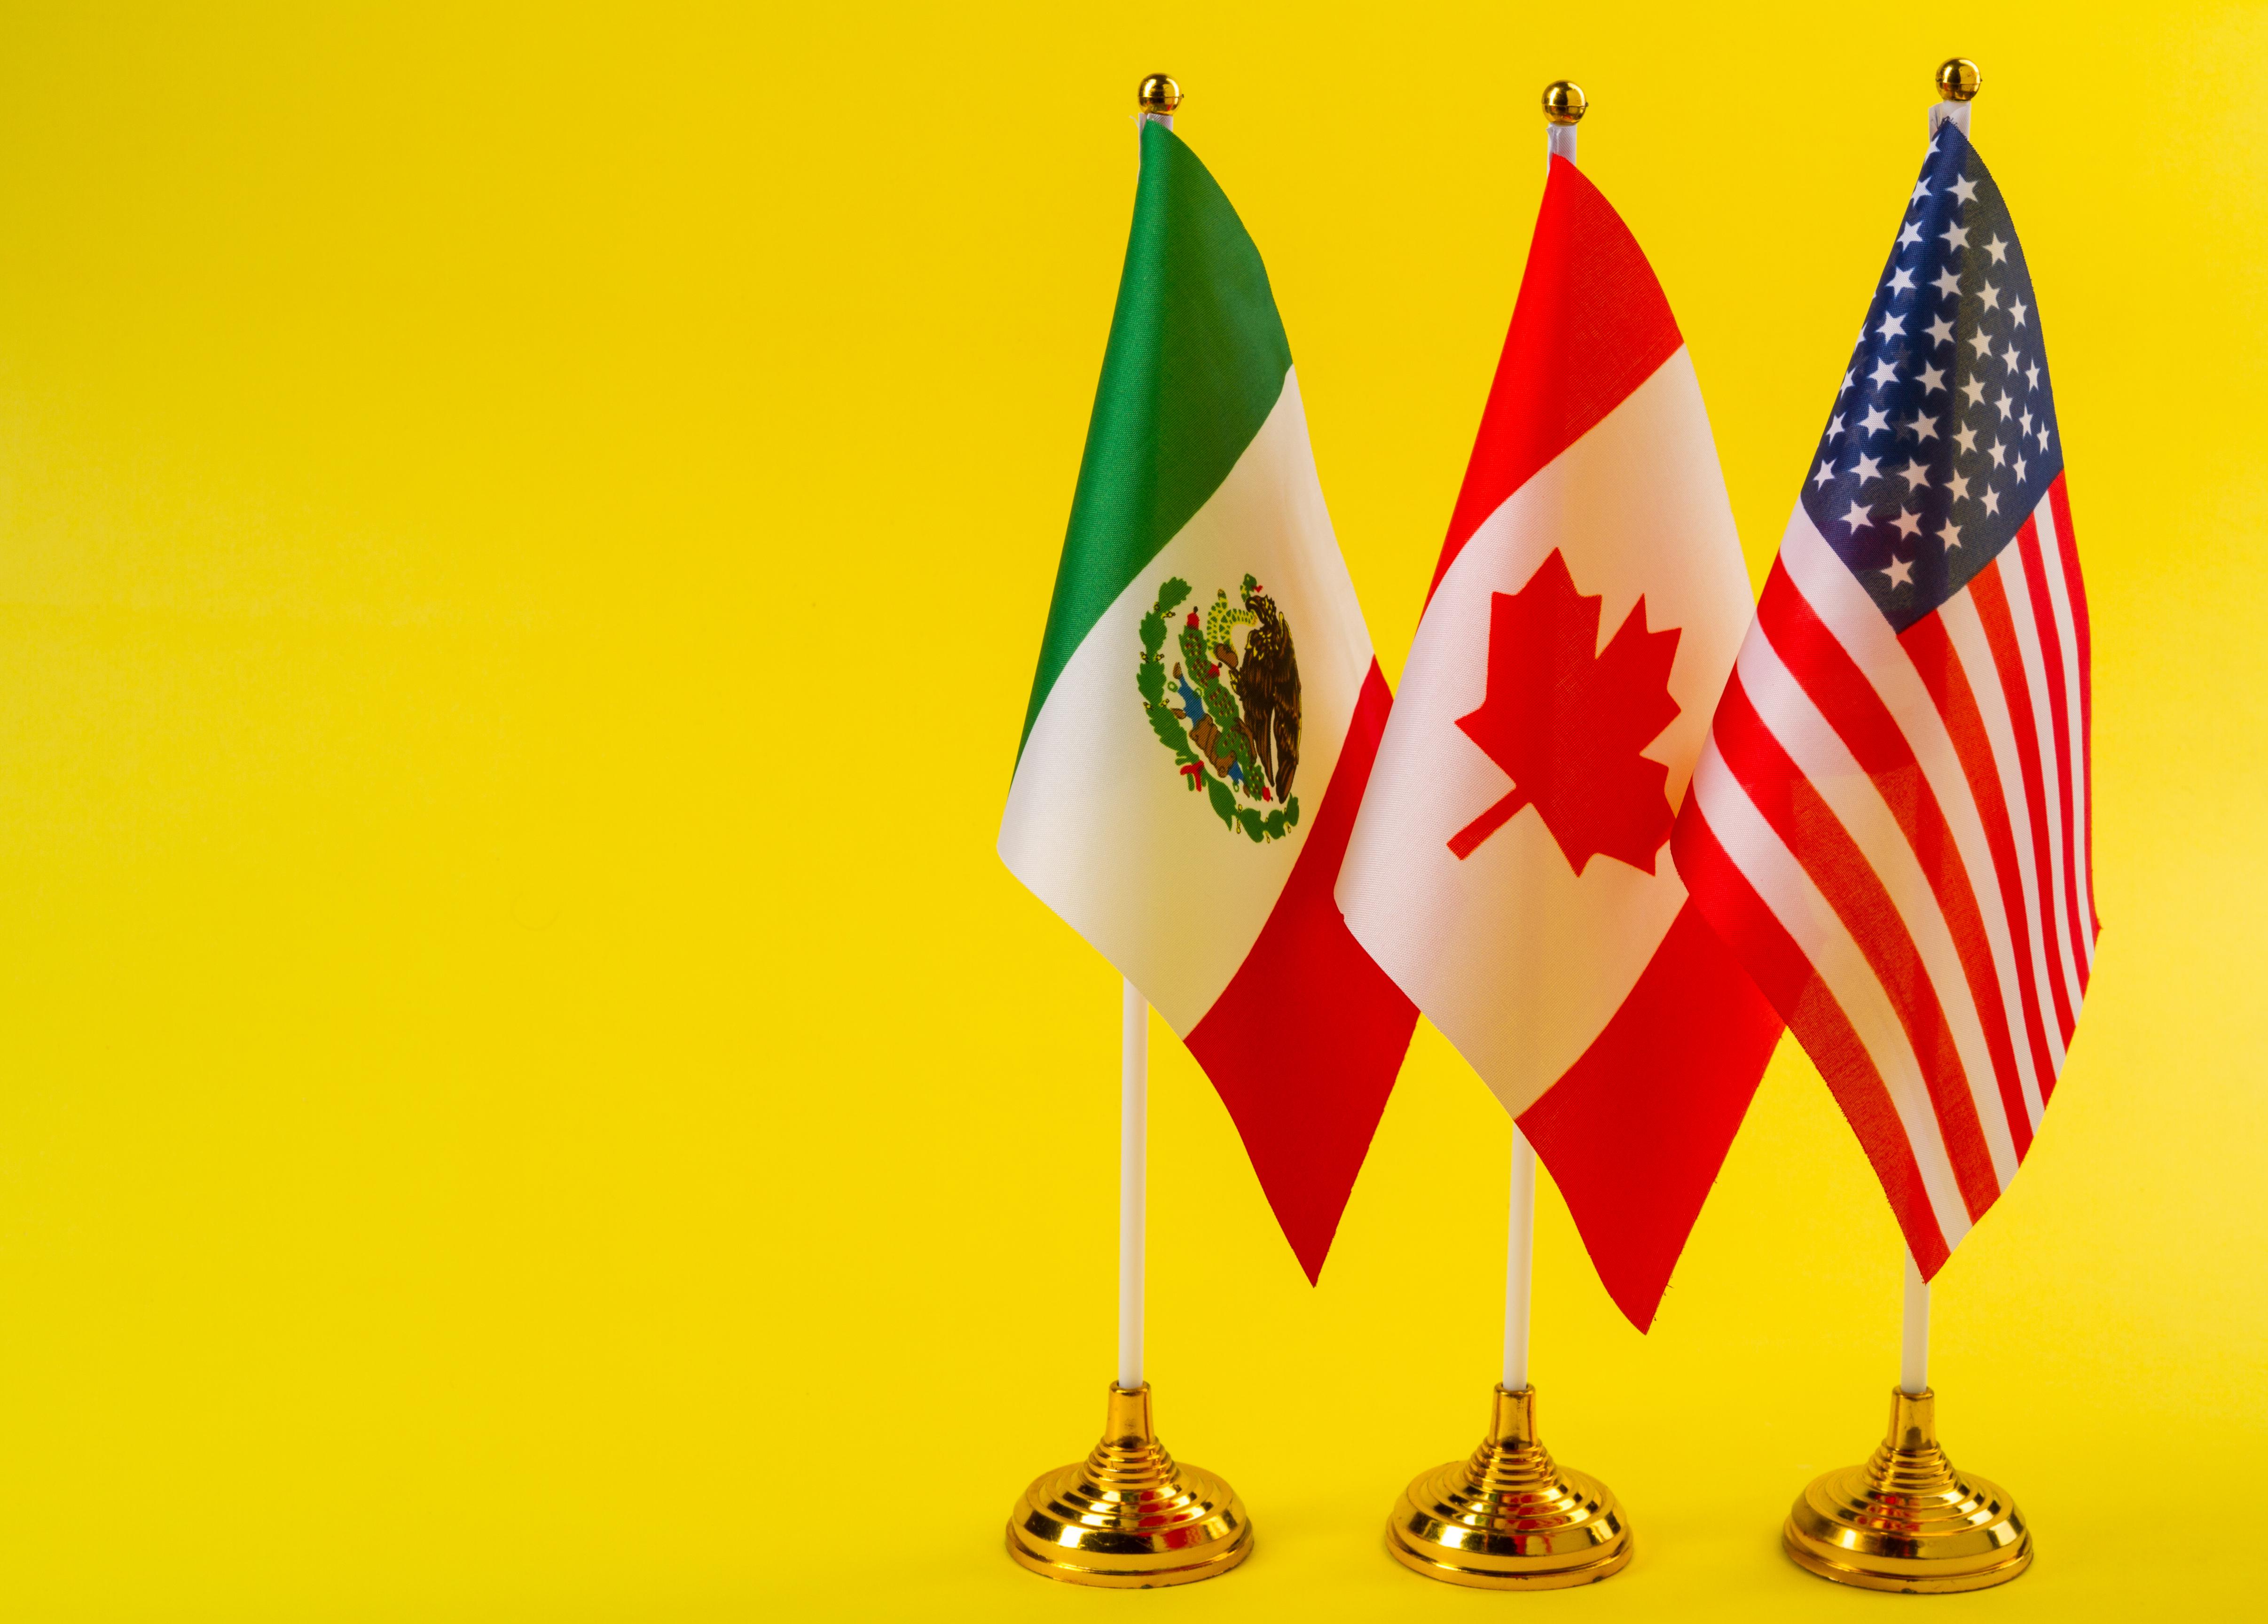 Mexico, Canada, and US flags side by side